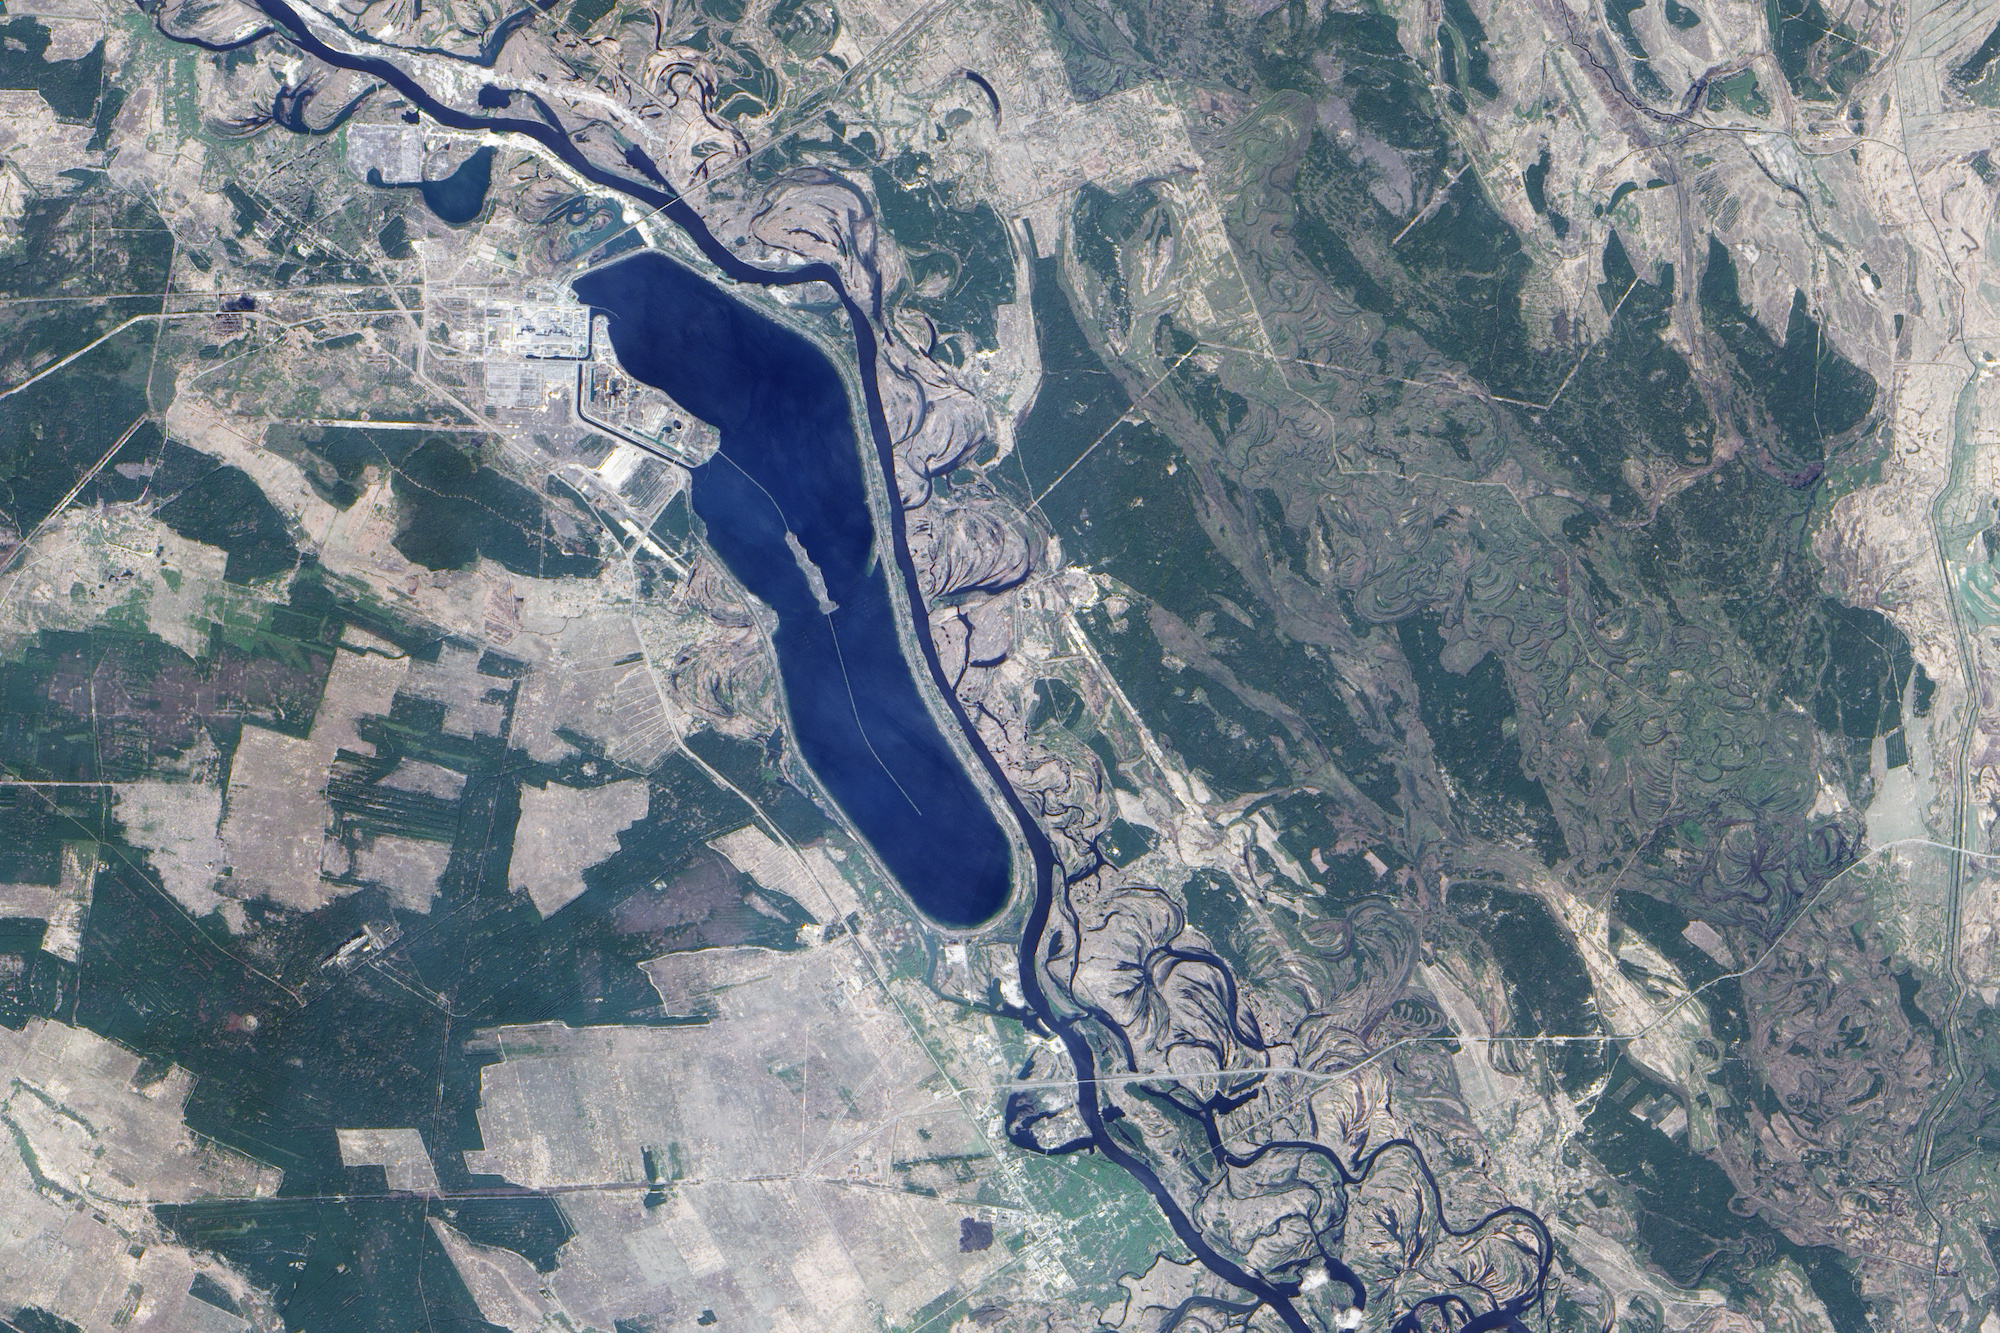 A satellite image of the Chernobyl area from 2009.